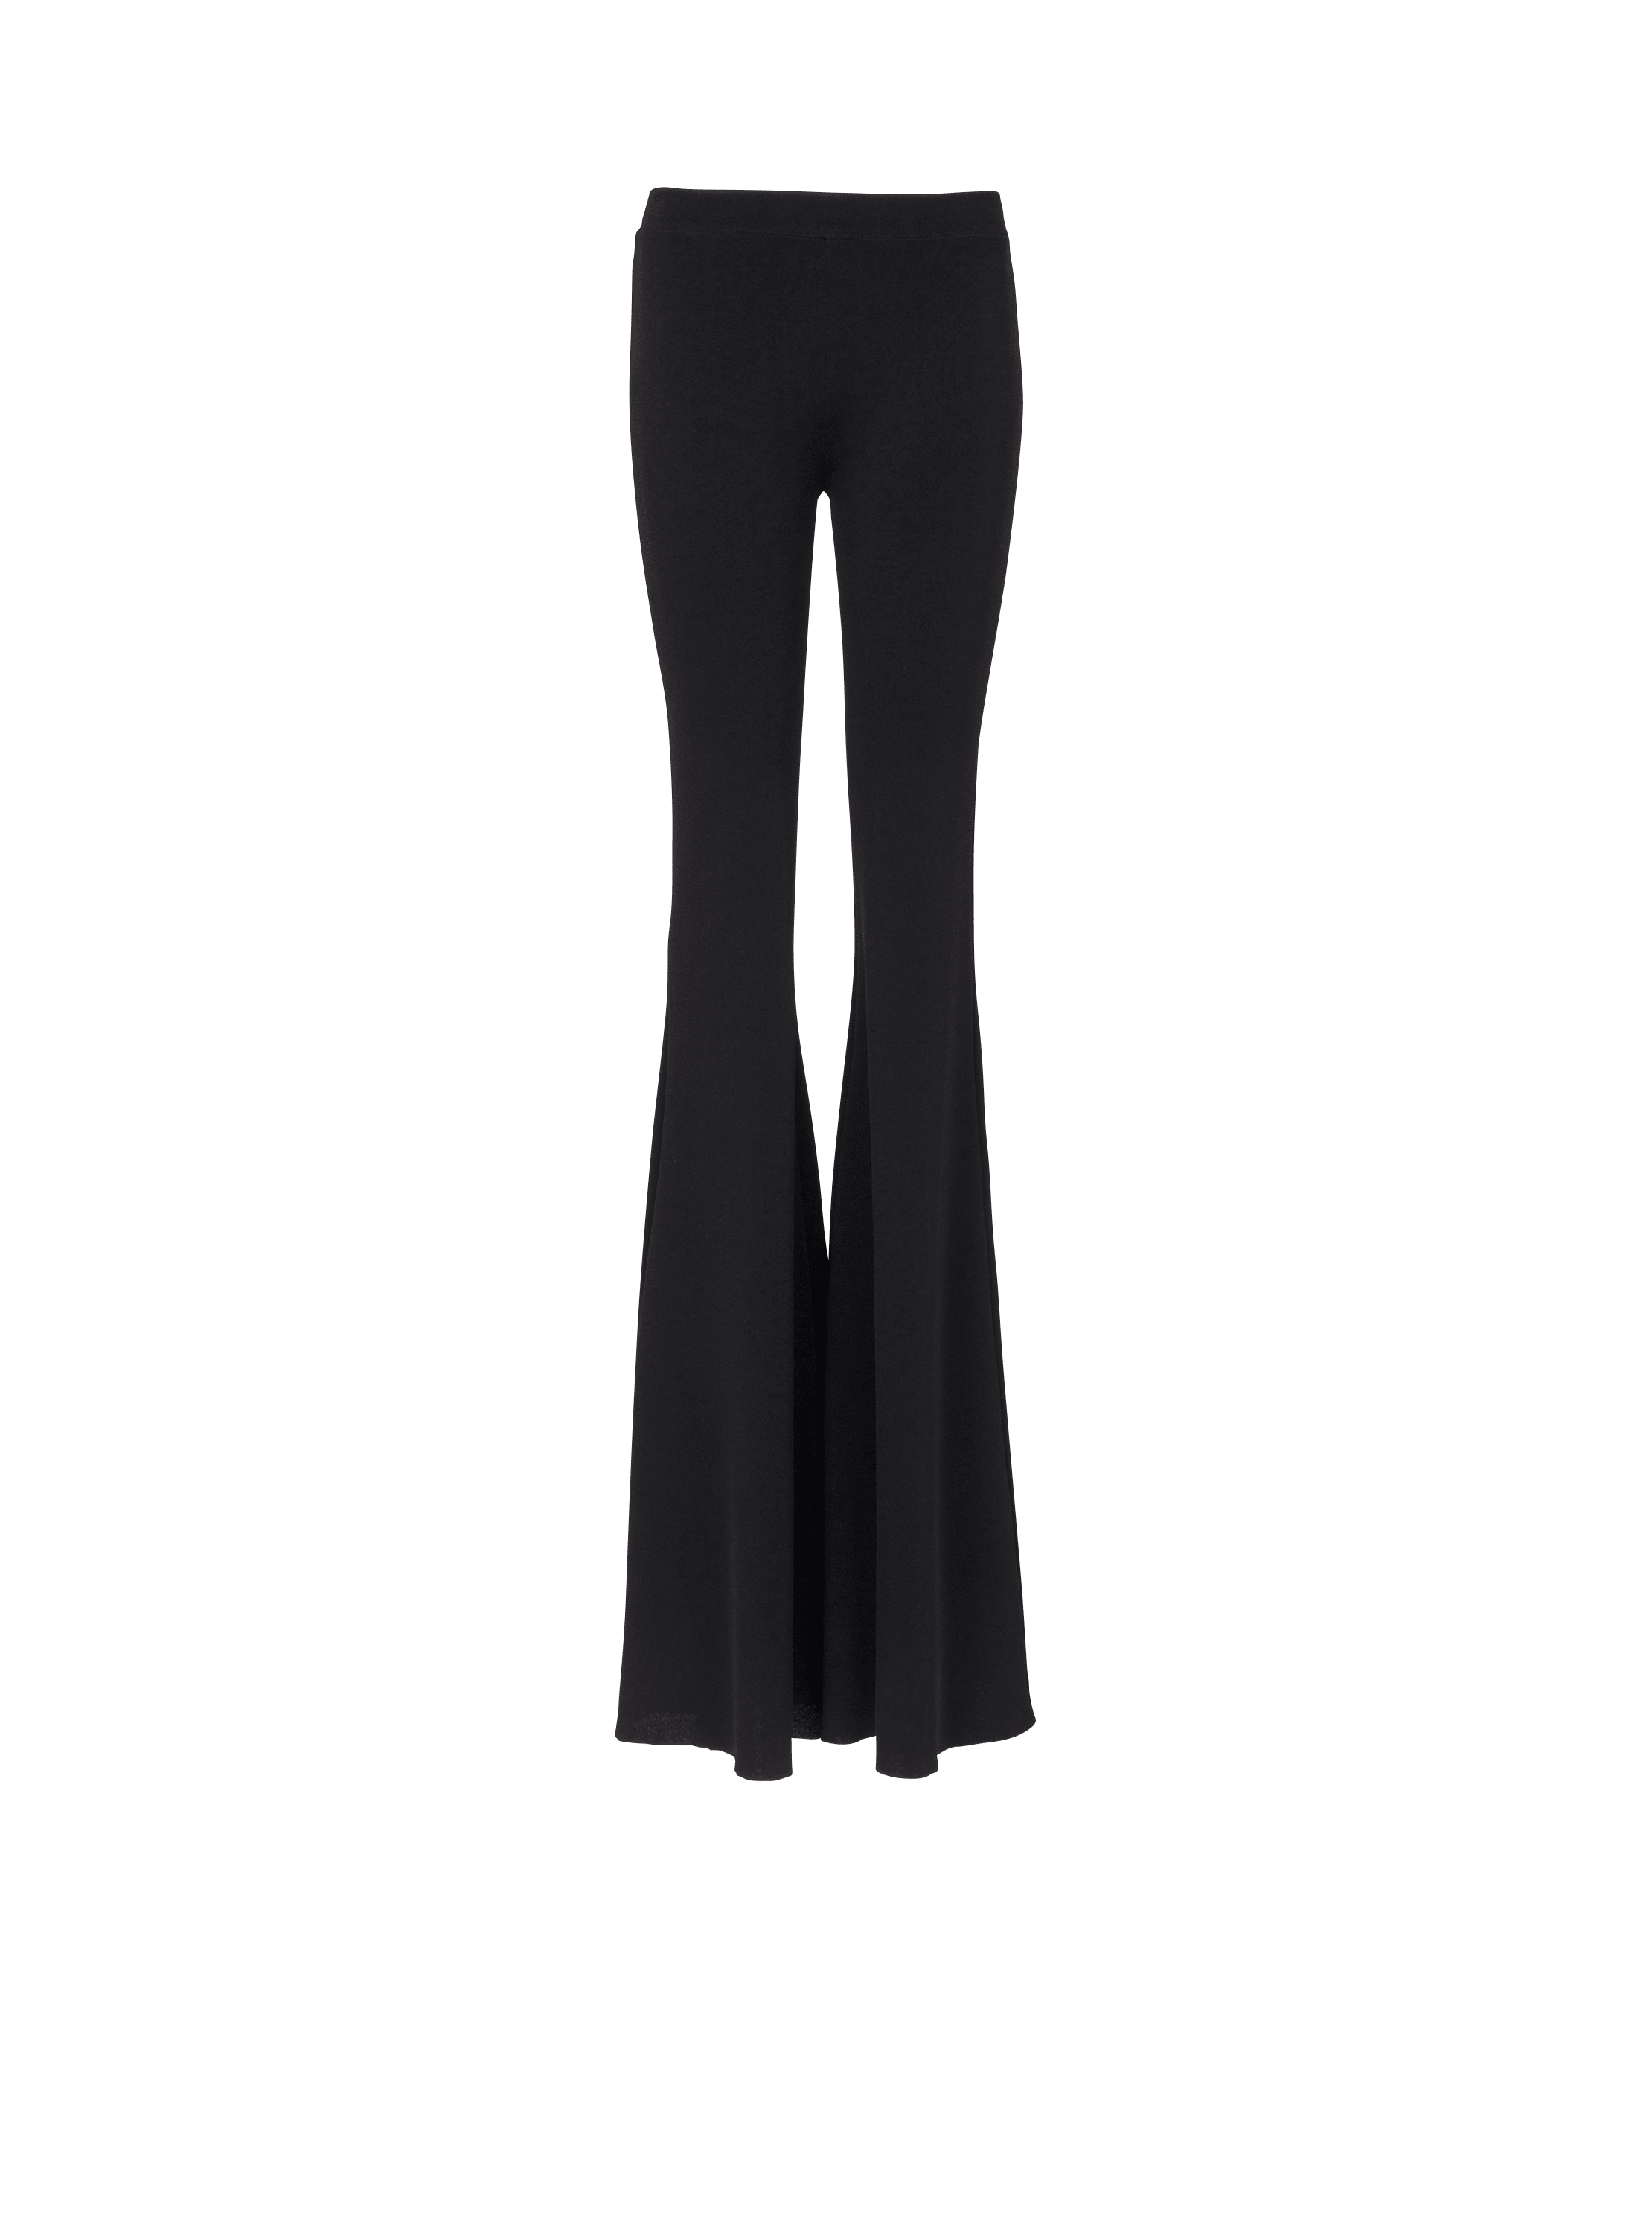 Express High Waisted Wide Flare Pant Black Women's 8 Long